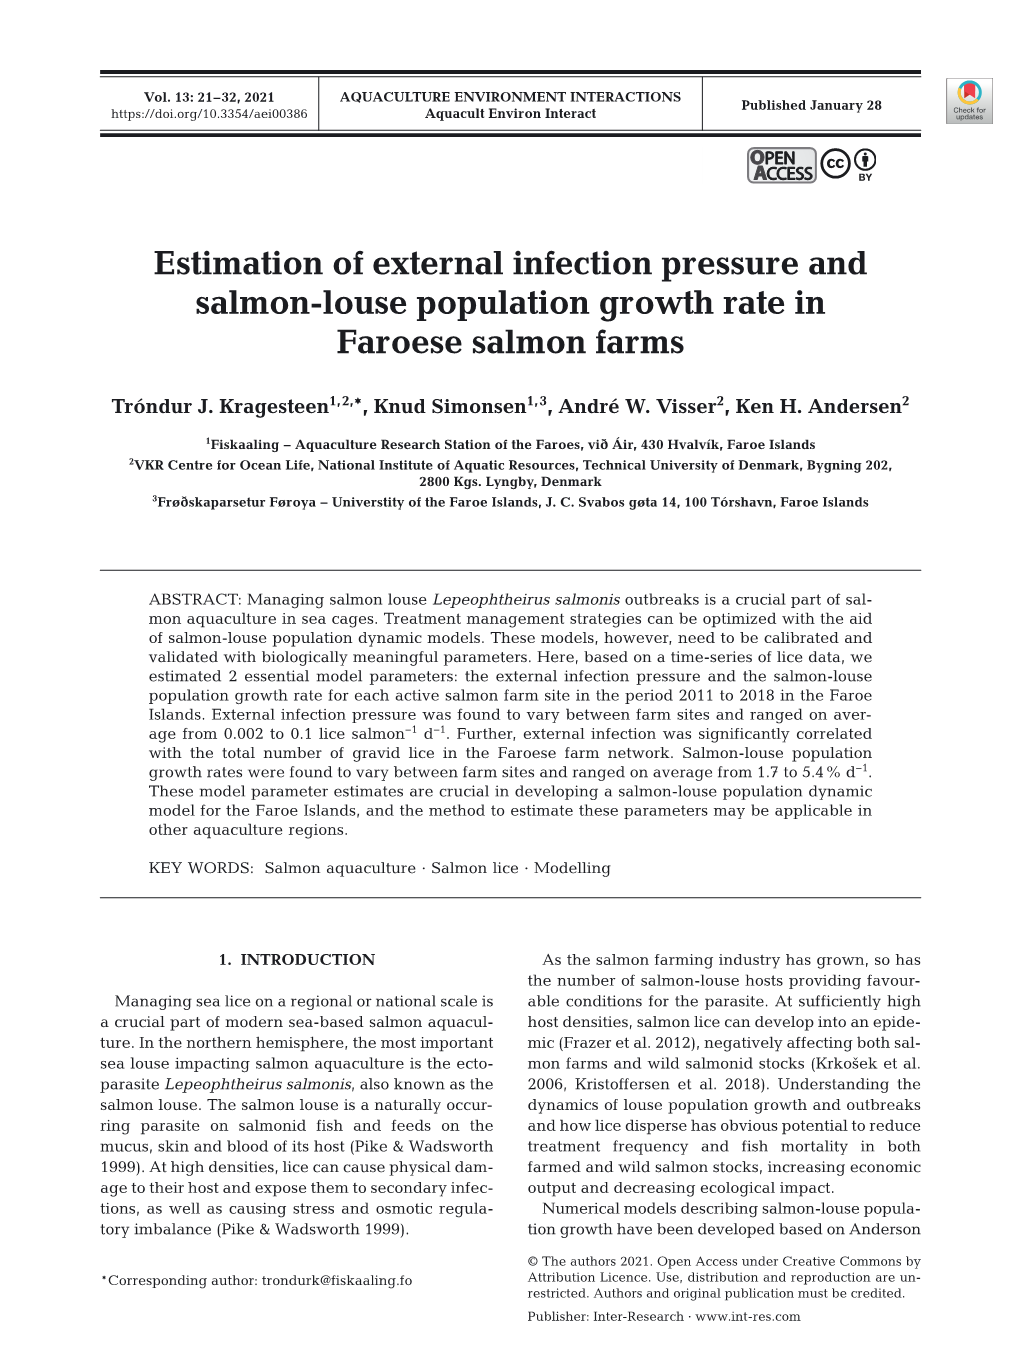 Estimation of External Infection Pressure and Salmon-Louse Population Growth Rate in Faroese Salmon Farms